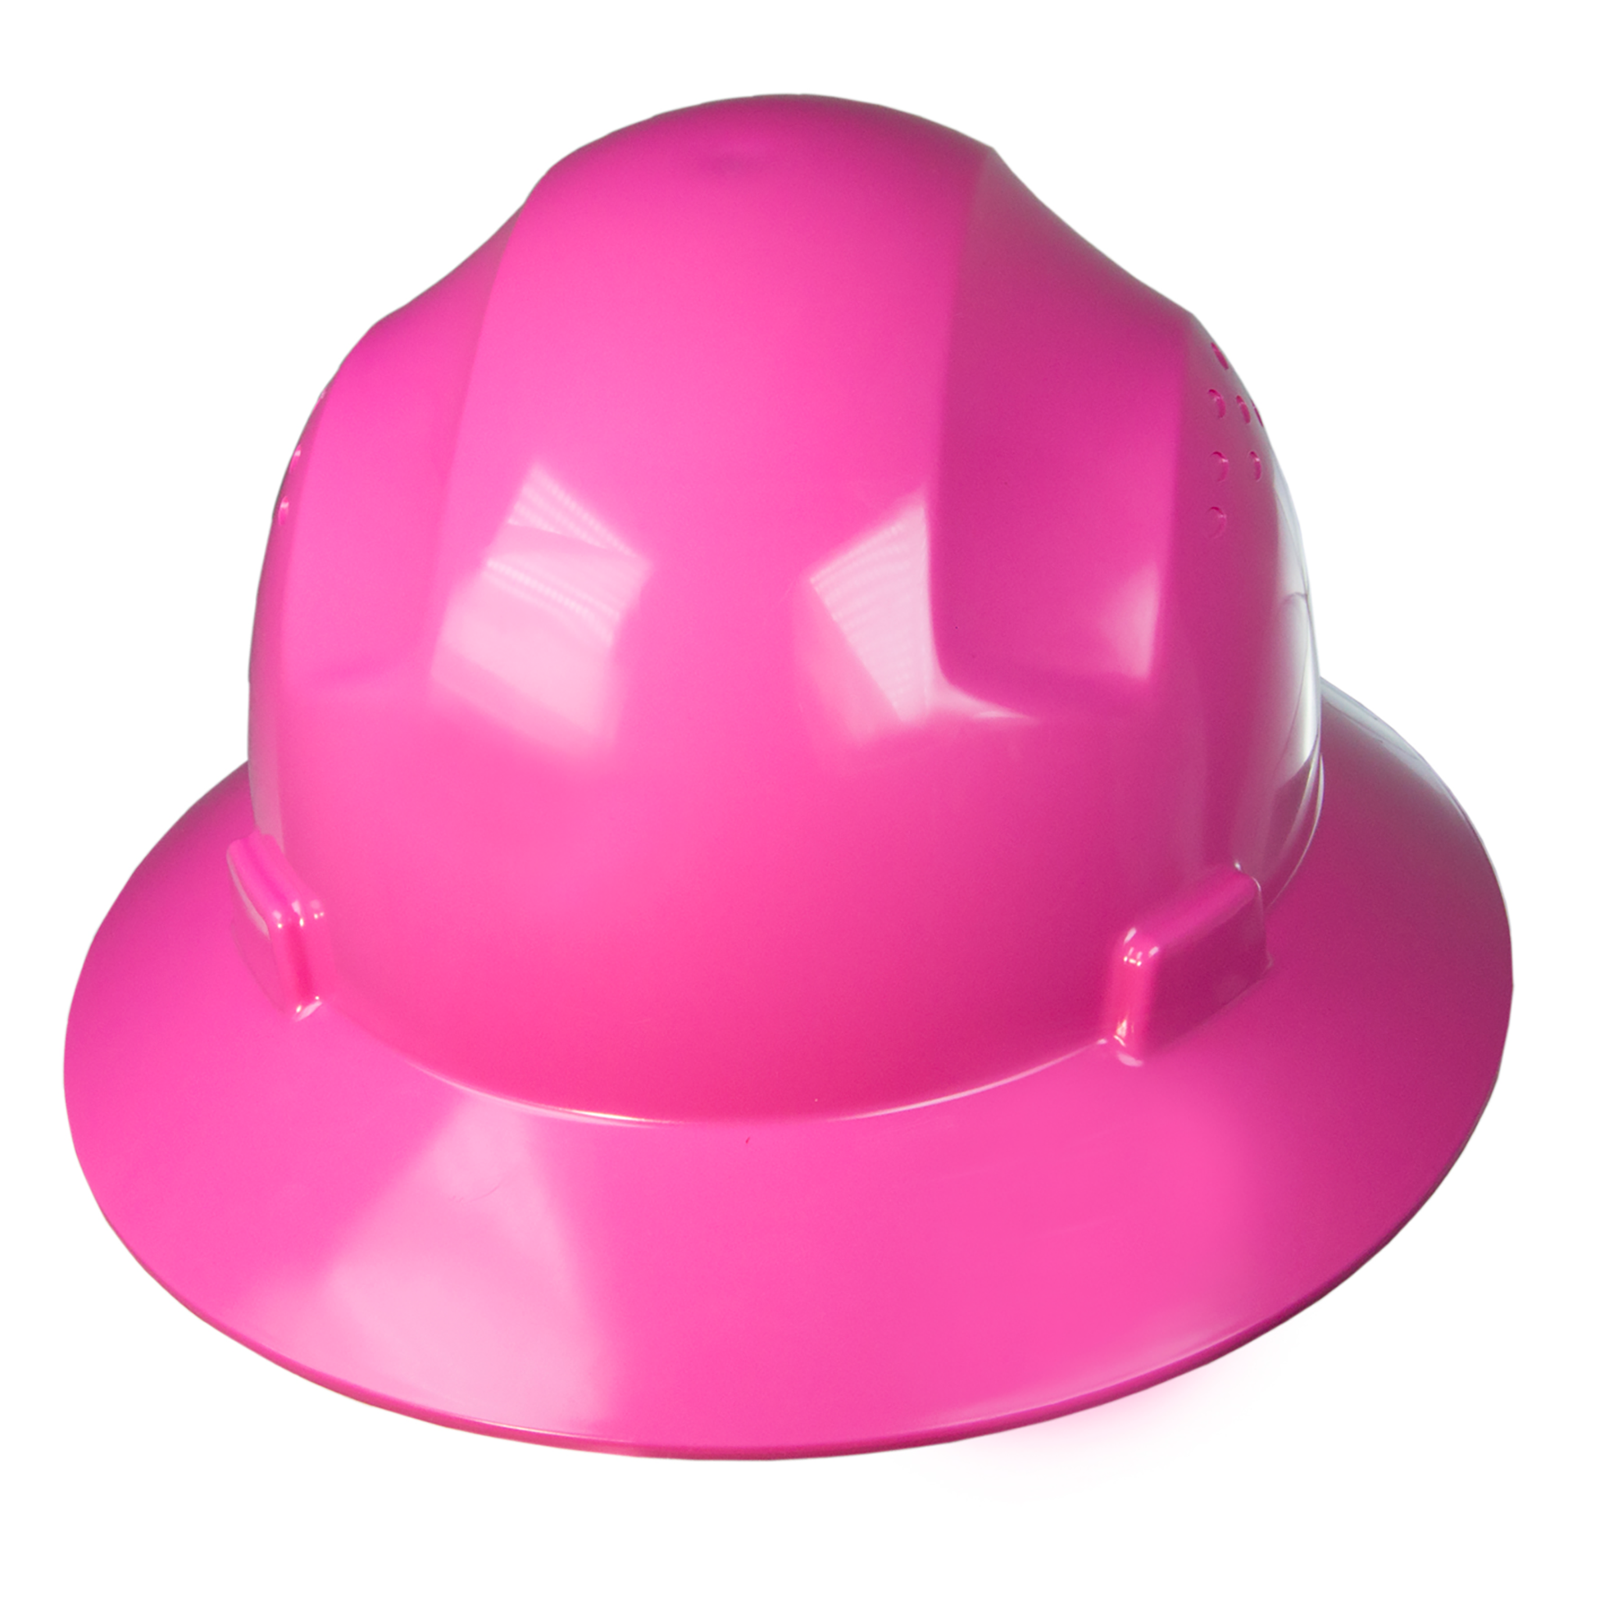 Full brim safety hard hat with 4 point suspension and wheel ratchet for head protection